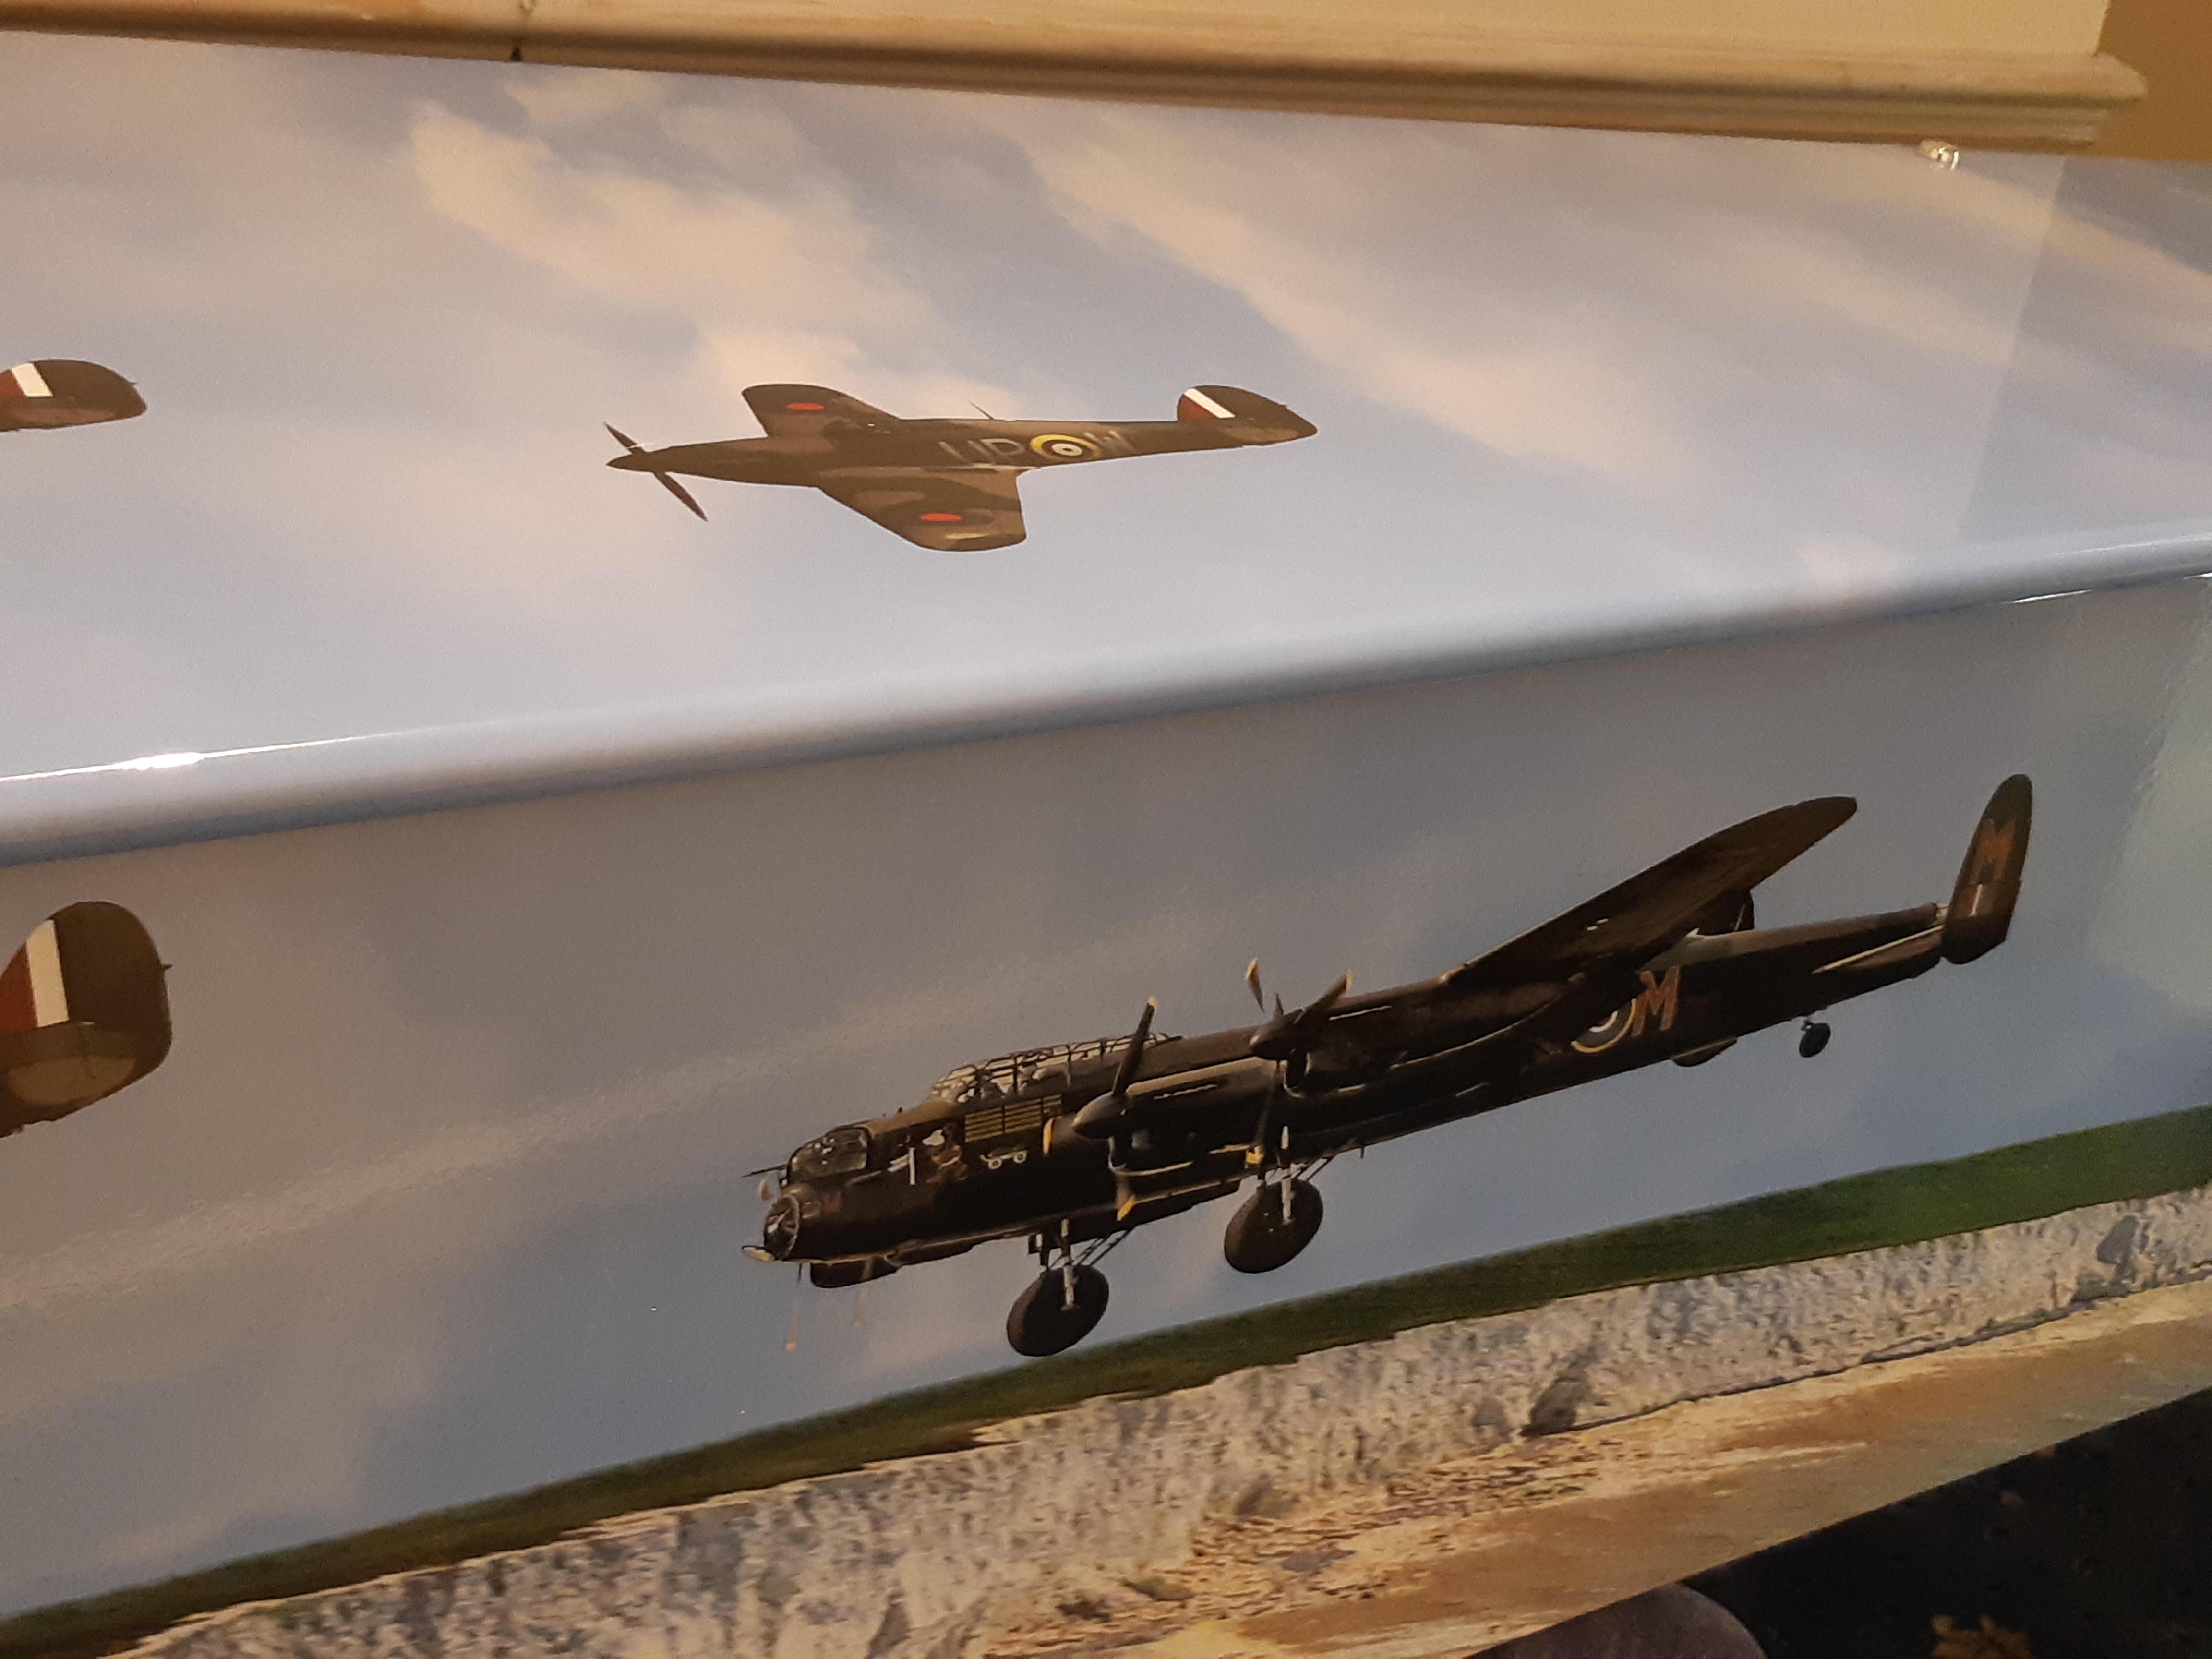 A Colourful Coffin with planes.